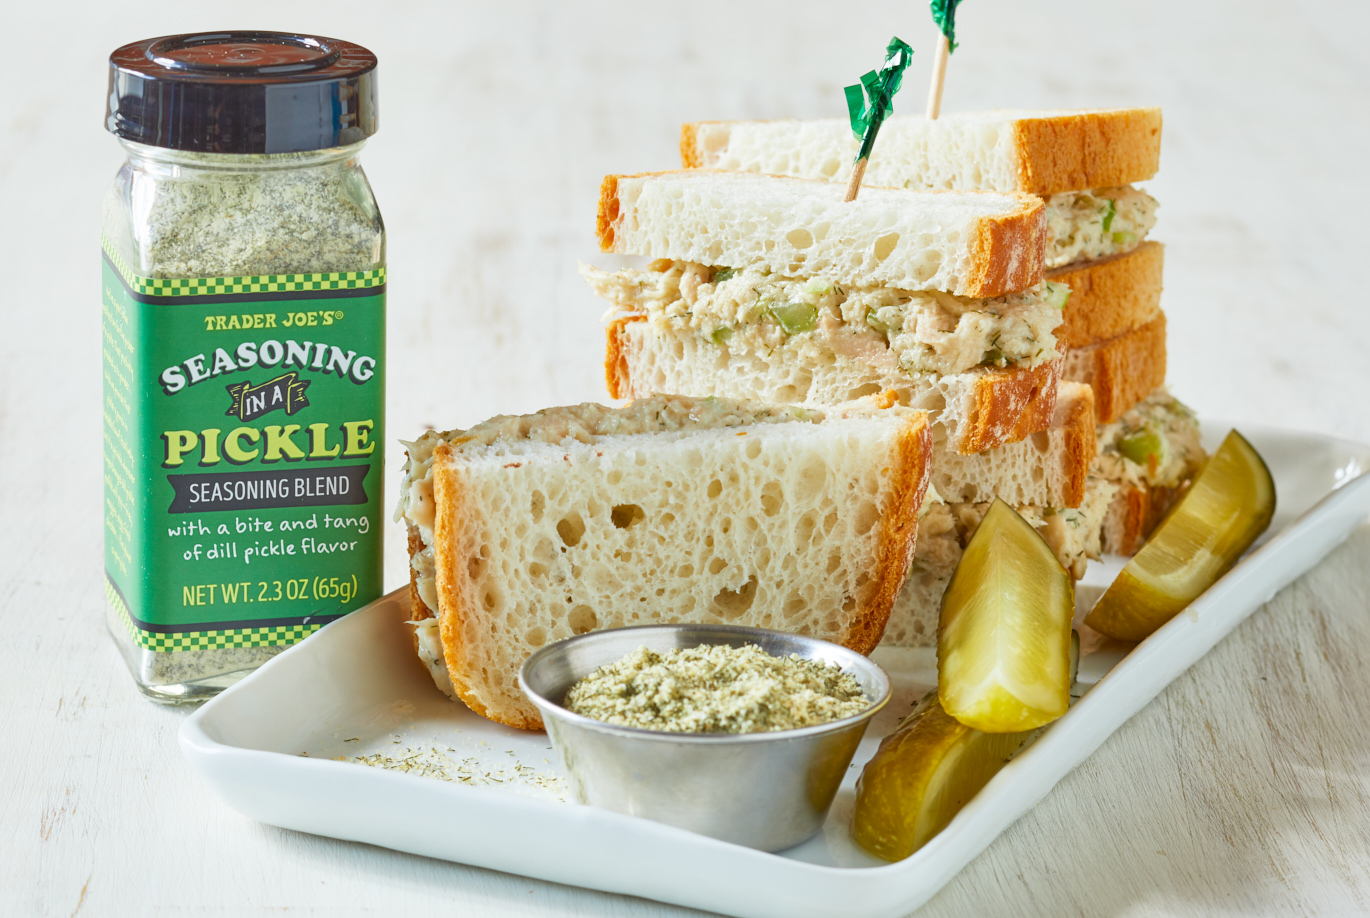 What to make with TJs pickle seasoning? : r/Noom